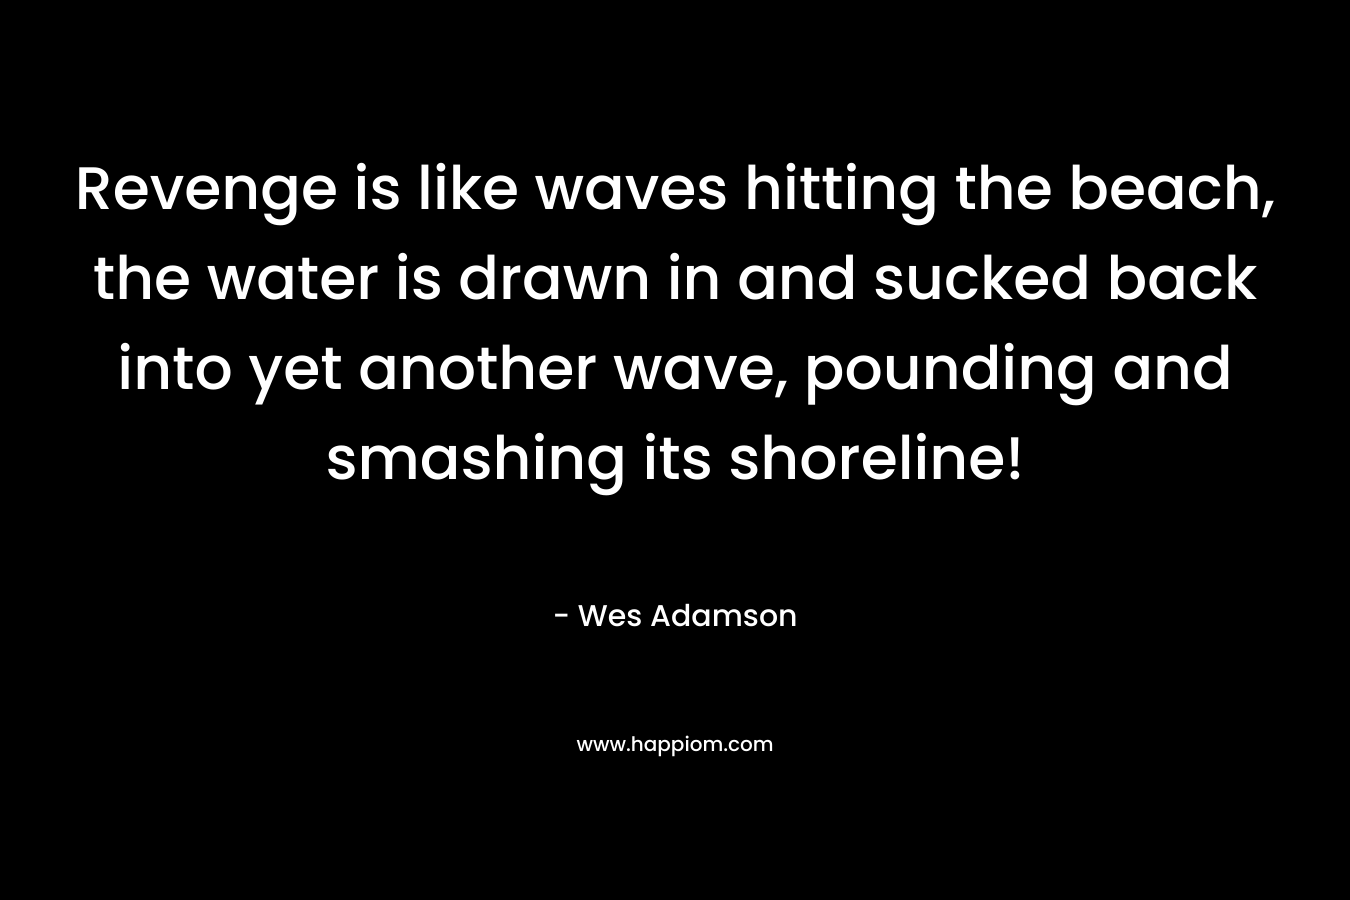 Revenge is like waves hitting the beach, the water is drawn in and sucked back into yet another wave, pounding and smashing its shoreline! – Wes Adamson